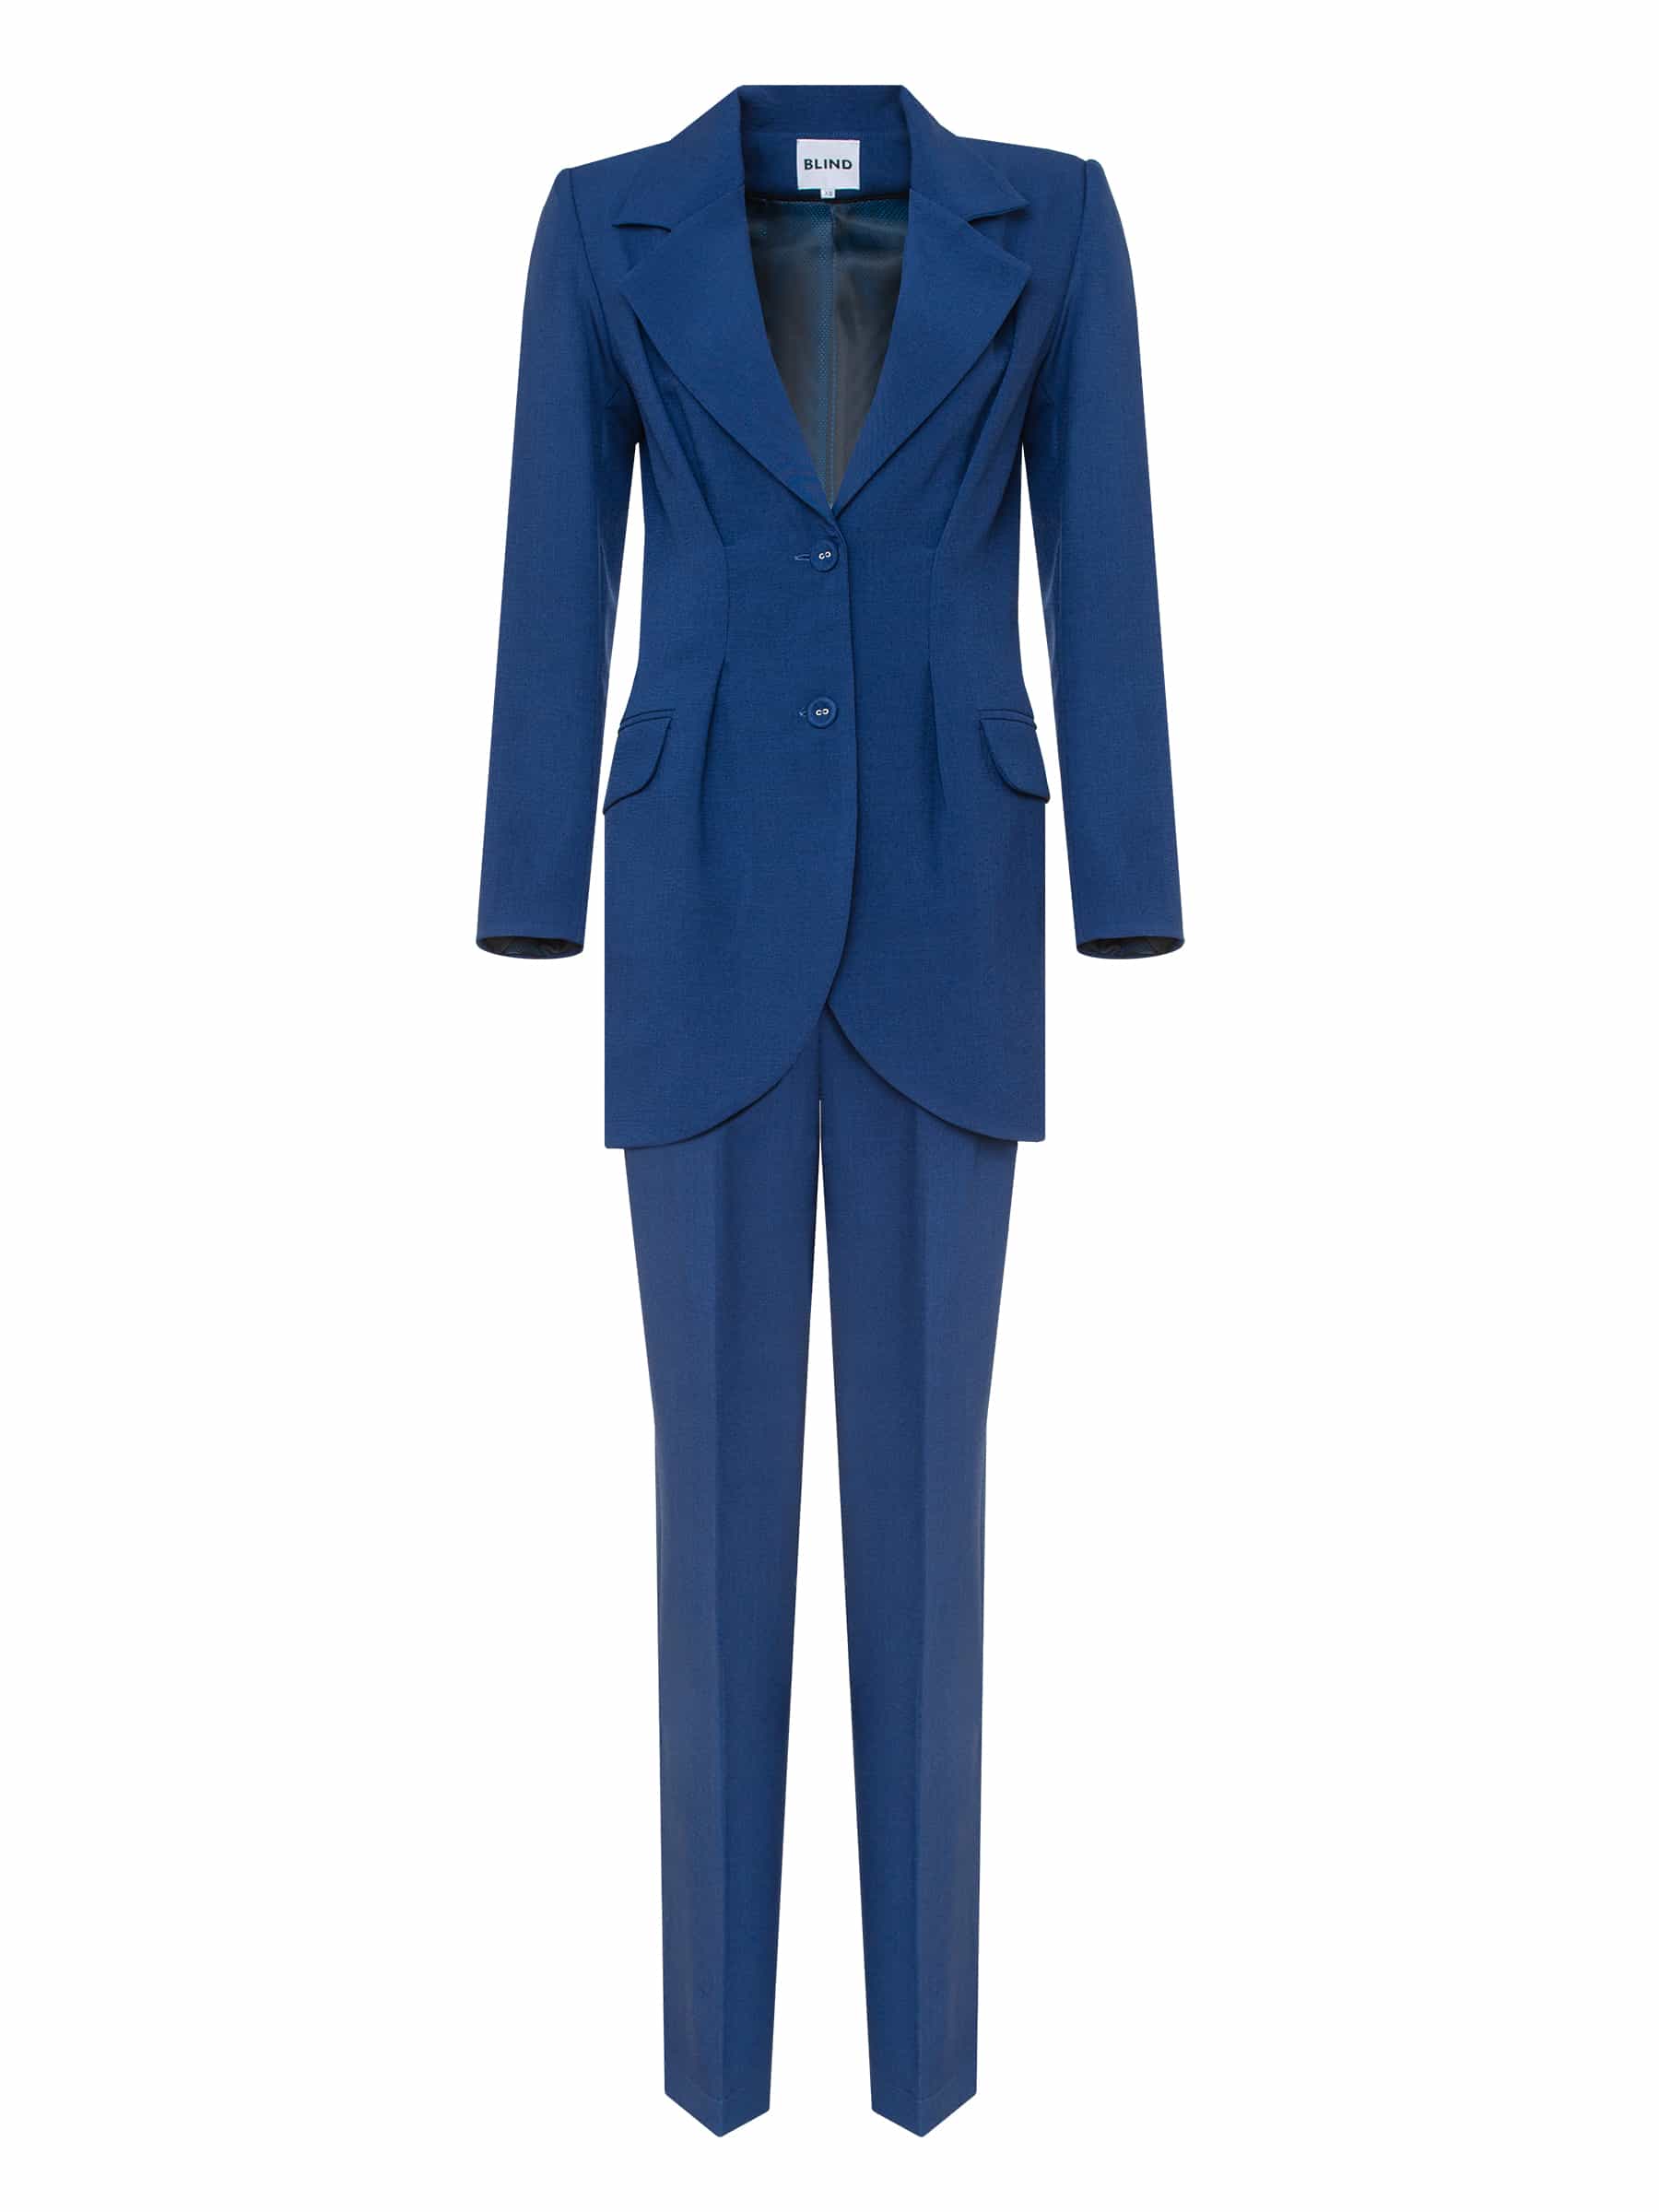 Two-piece blue suit (jacket and pants)